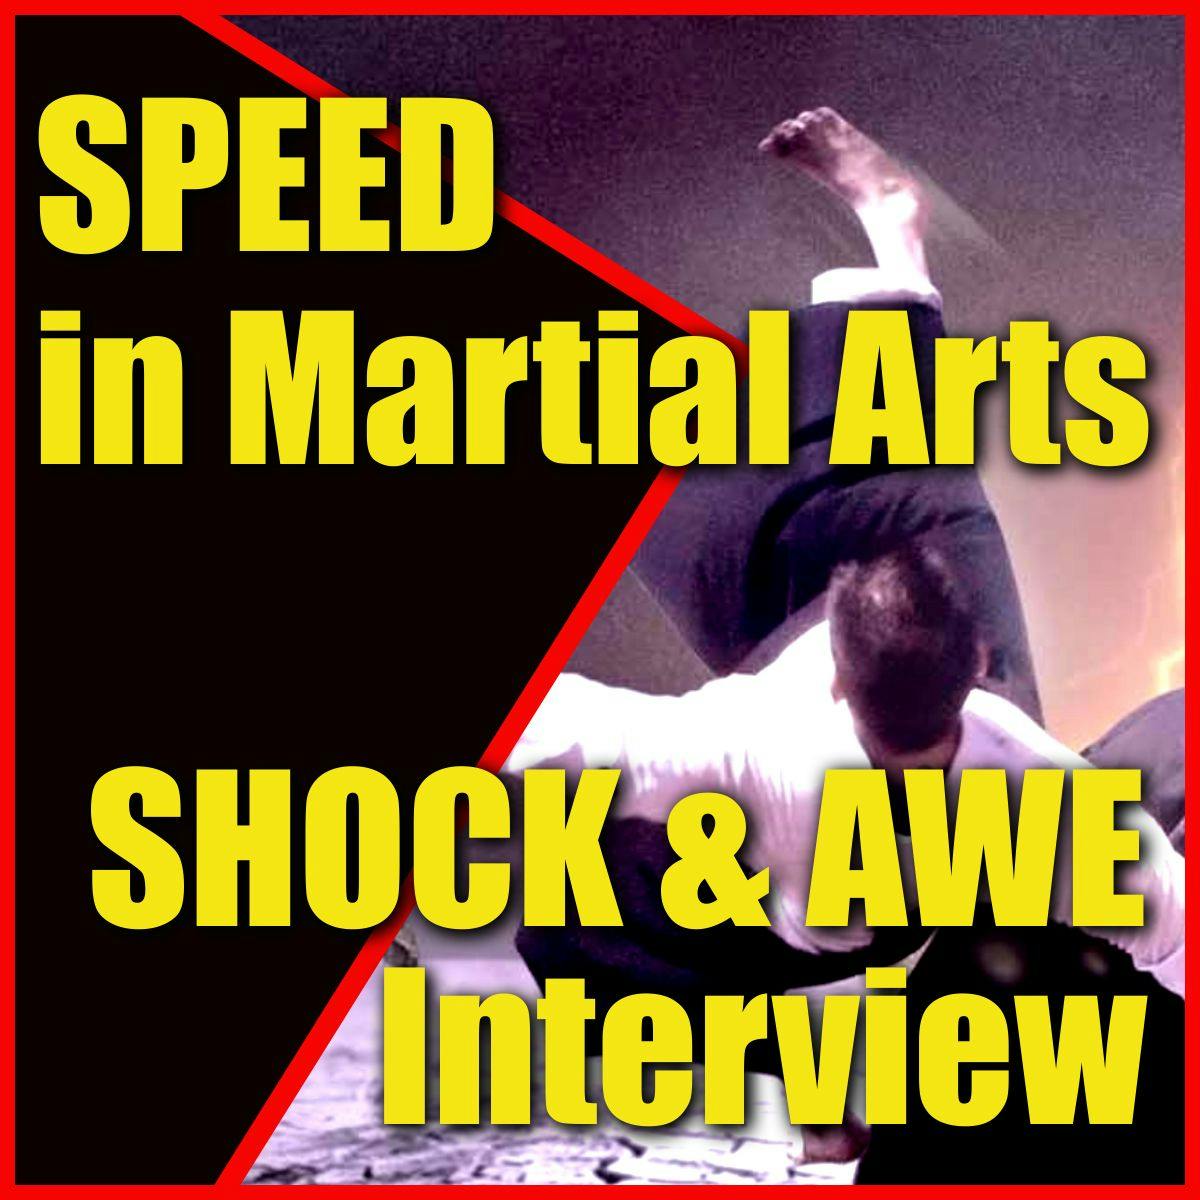 SPEED in Martial Arts SHOCK & AWE Symposium Interview Revealed